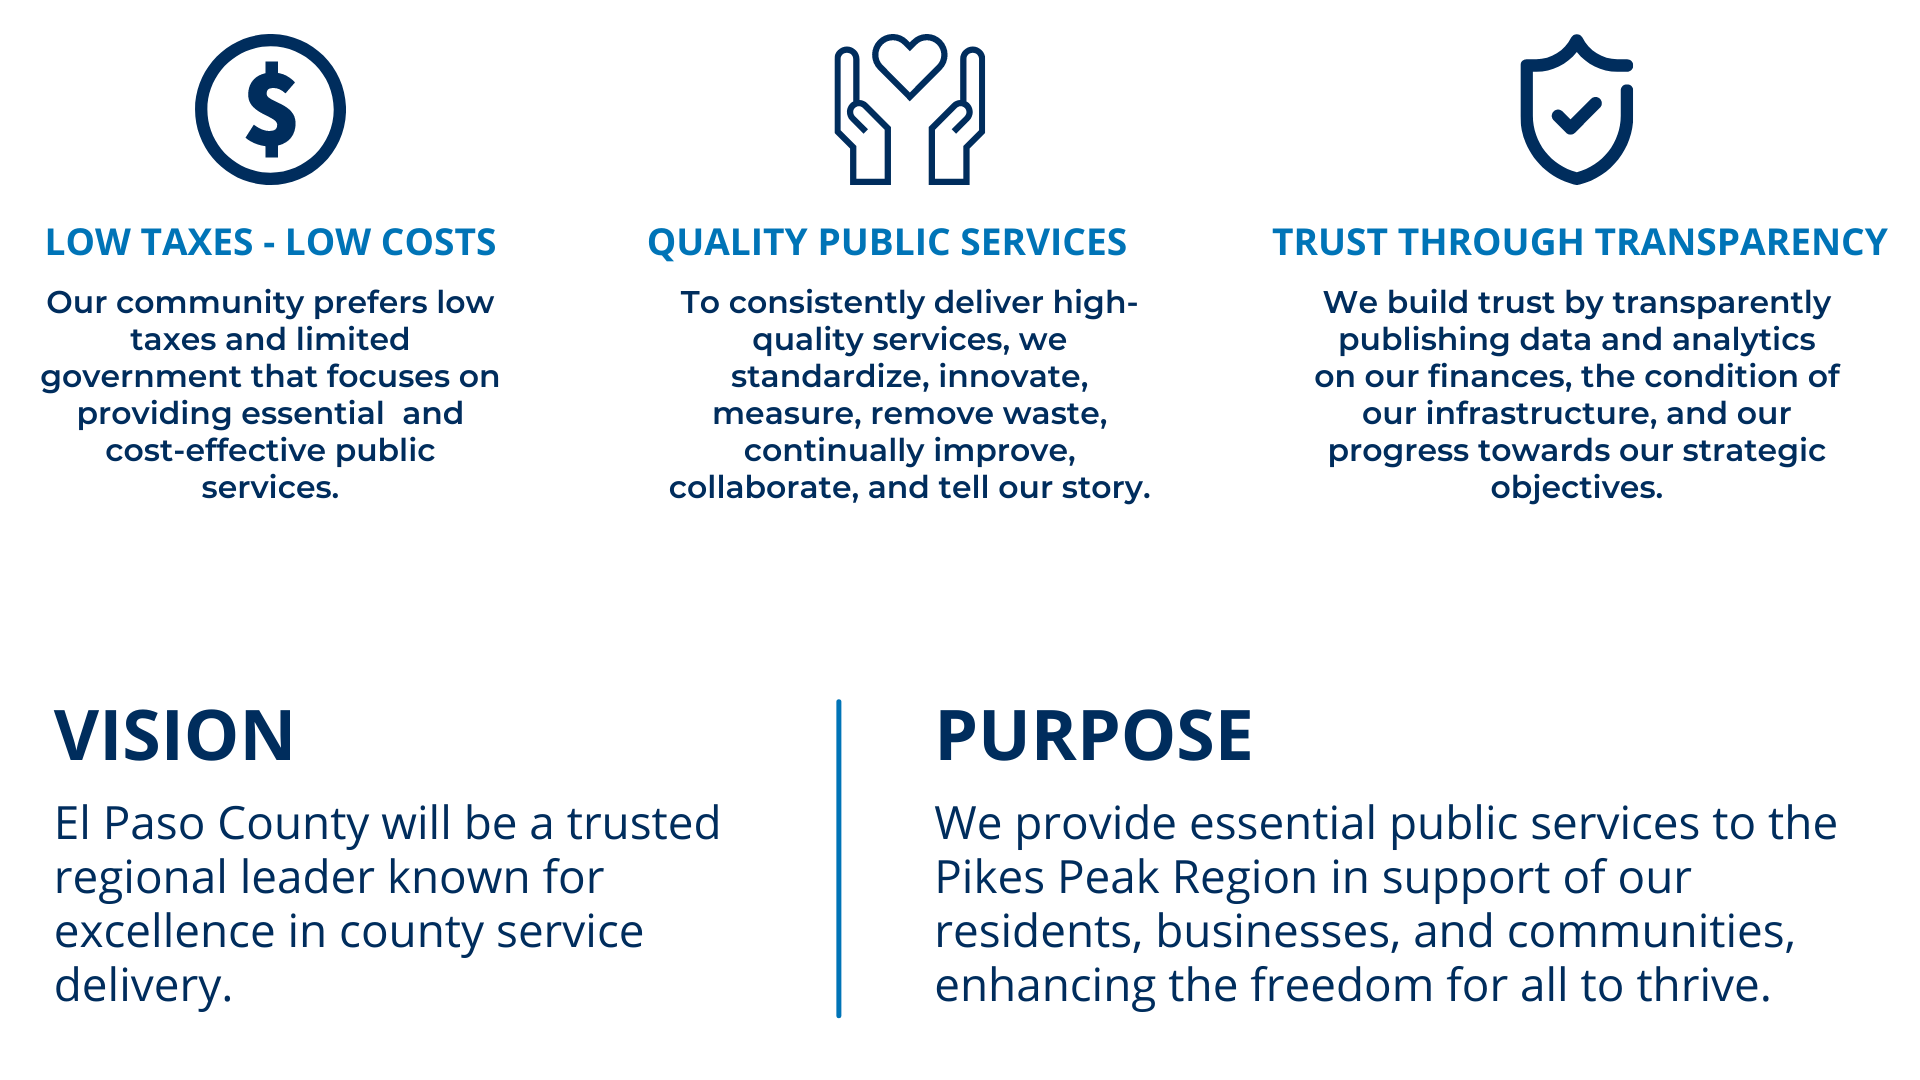 Graphic showing with text and icons indicating the values of EPC: Low taxes - Low costs, Quality Public services, Trust through Transparency. Vision - El Paso County will be a trusted regional leader known for excellence in county service delivery. Purpose - We provide essential public services to the Pikes Peak Region in support of our residents, businesses, and communities, enhancing the freedom for all to thrive.